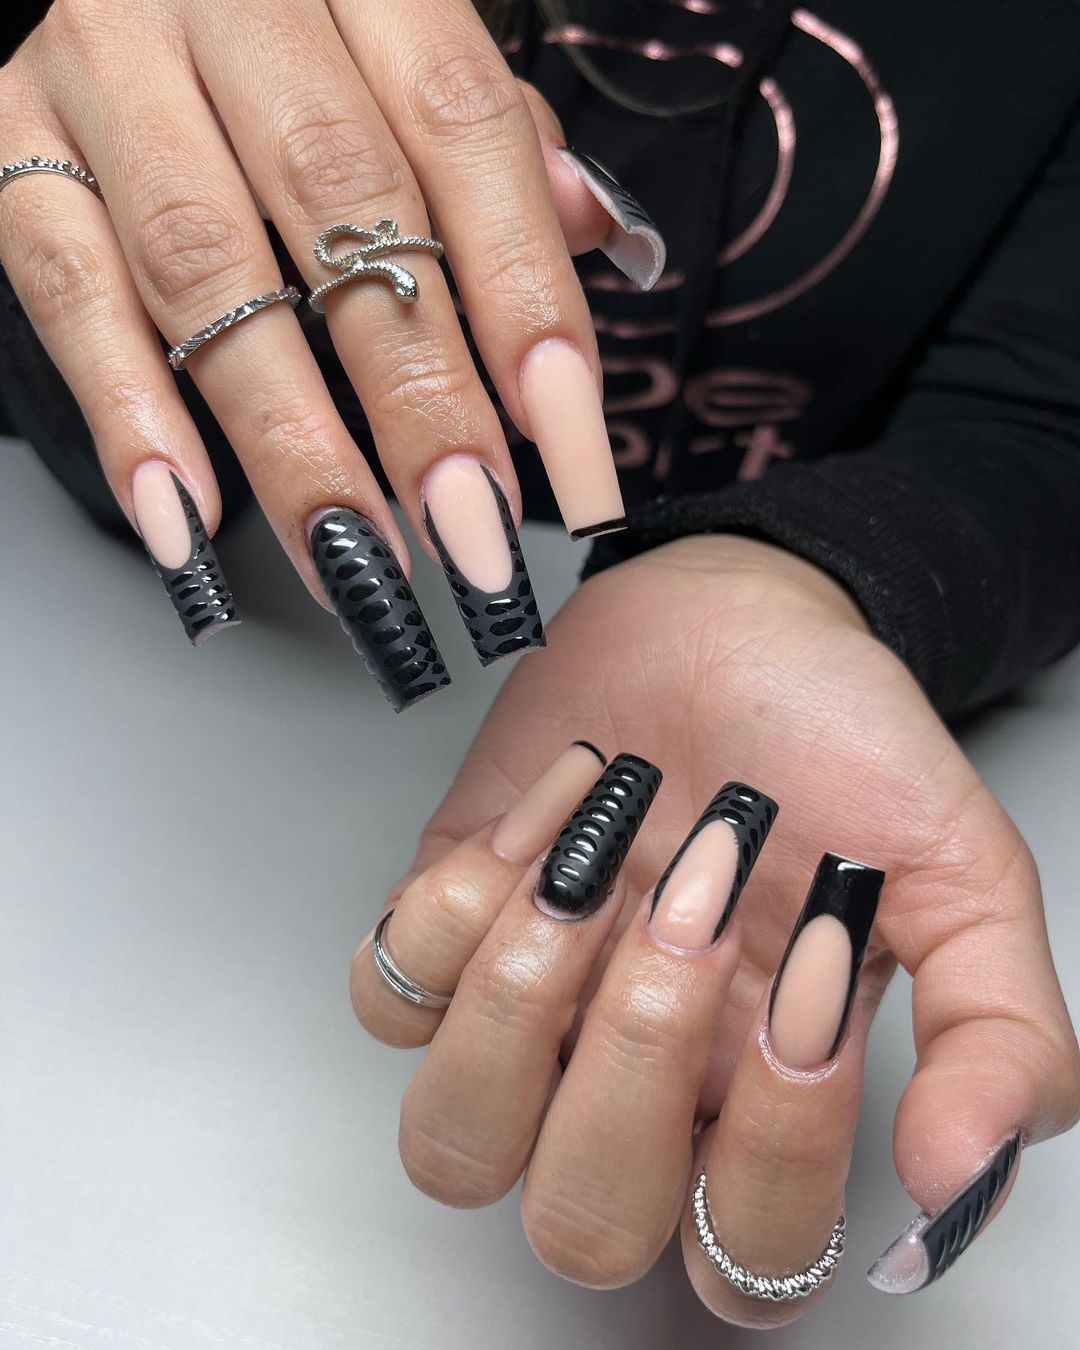 How to Maintain Your Black Acrylic Nails